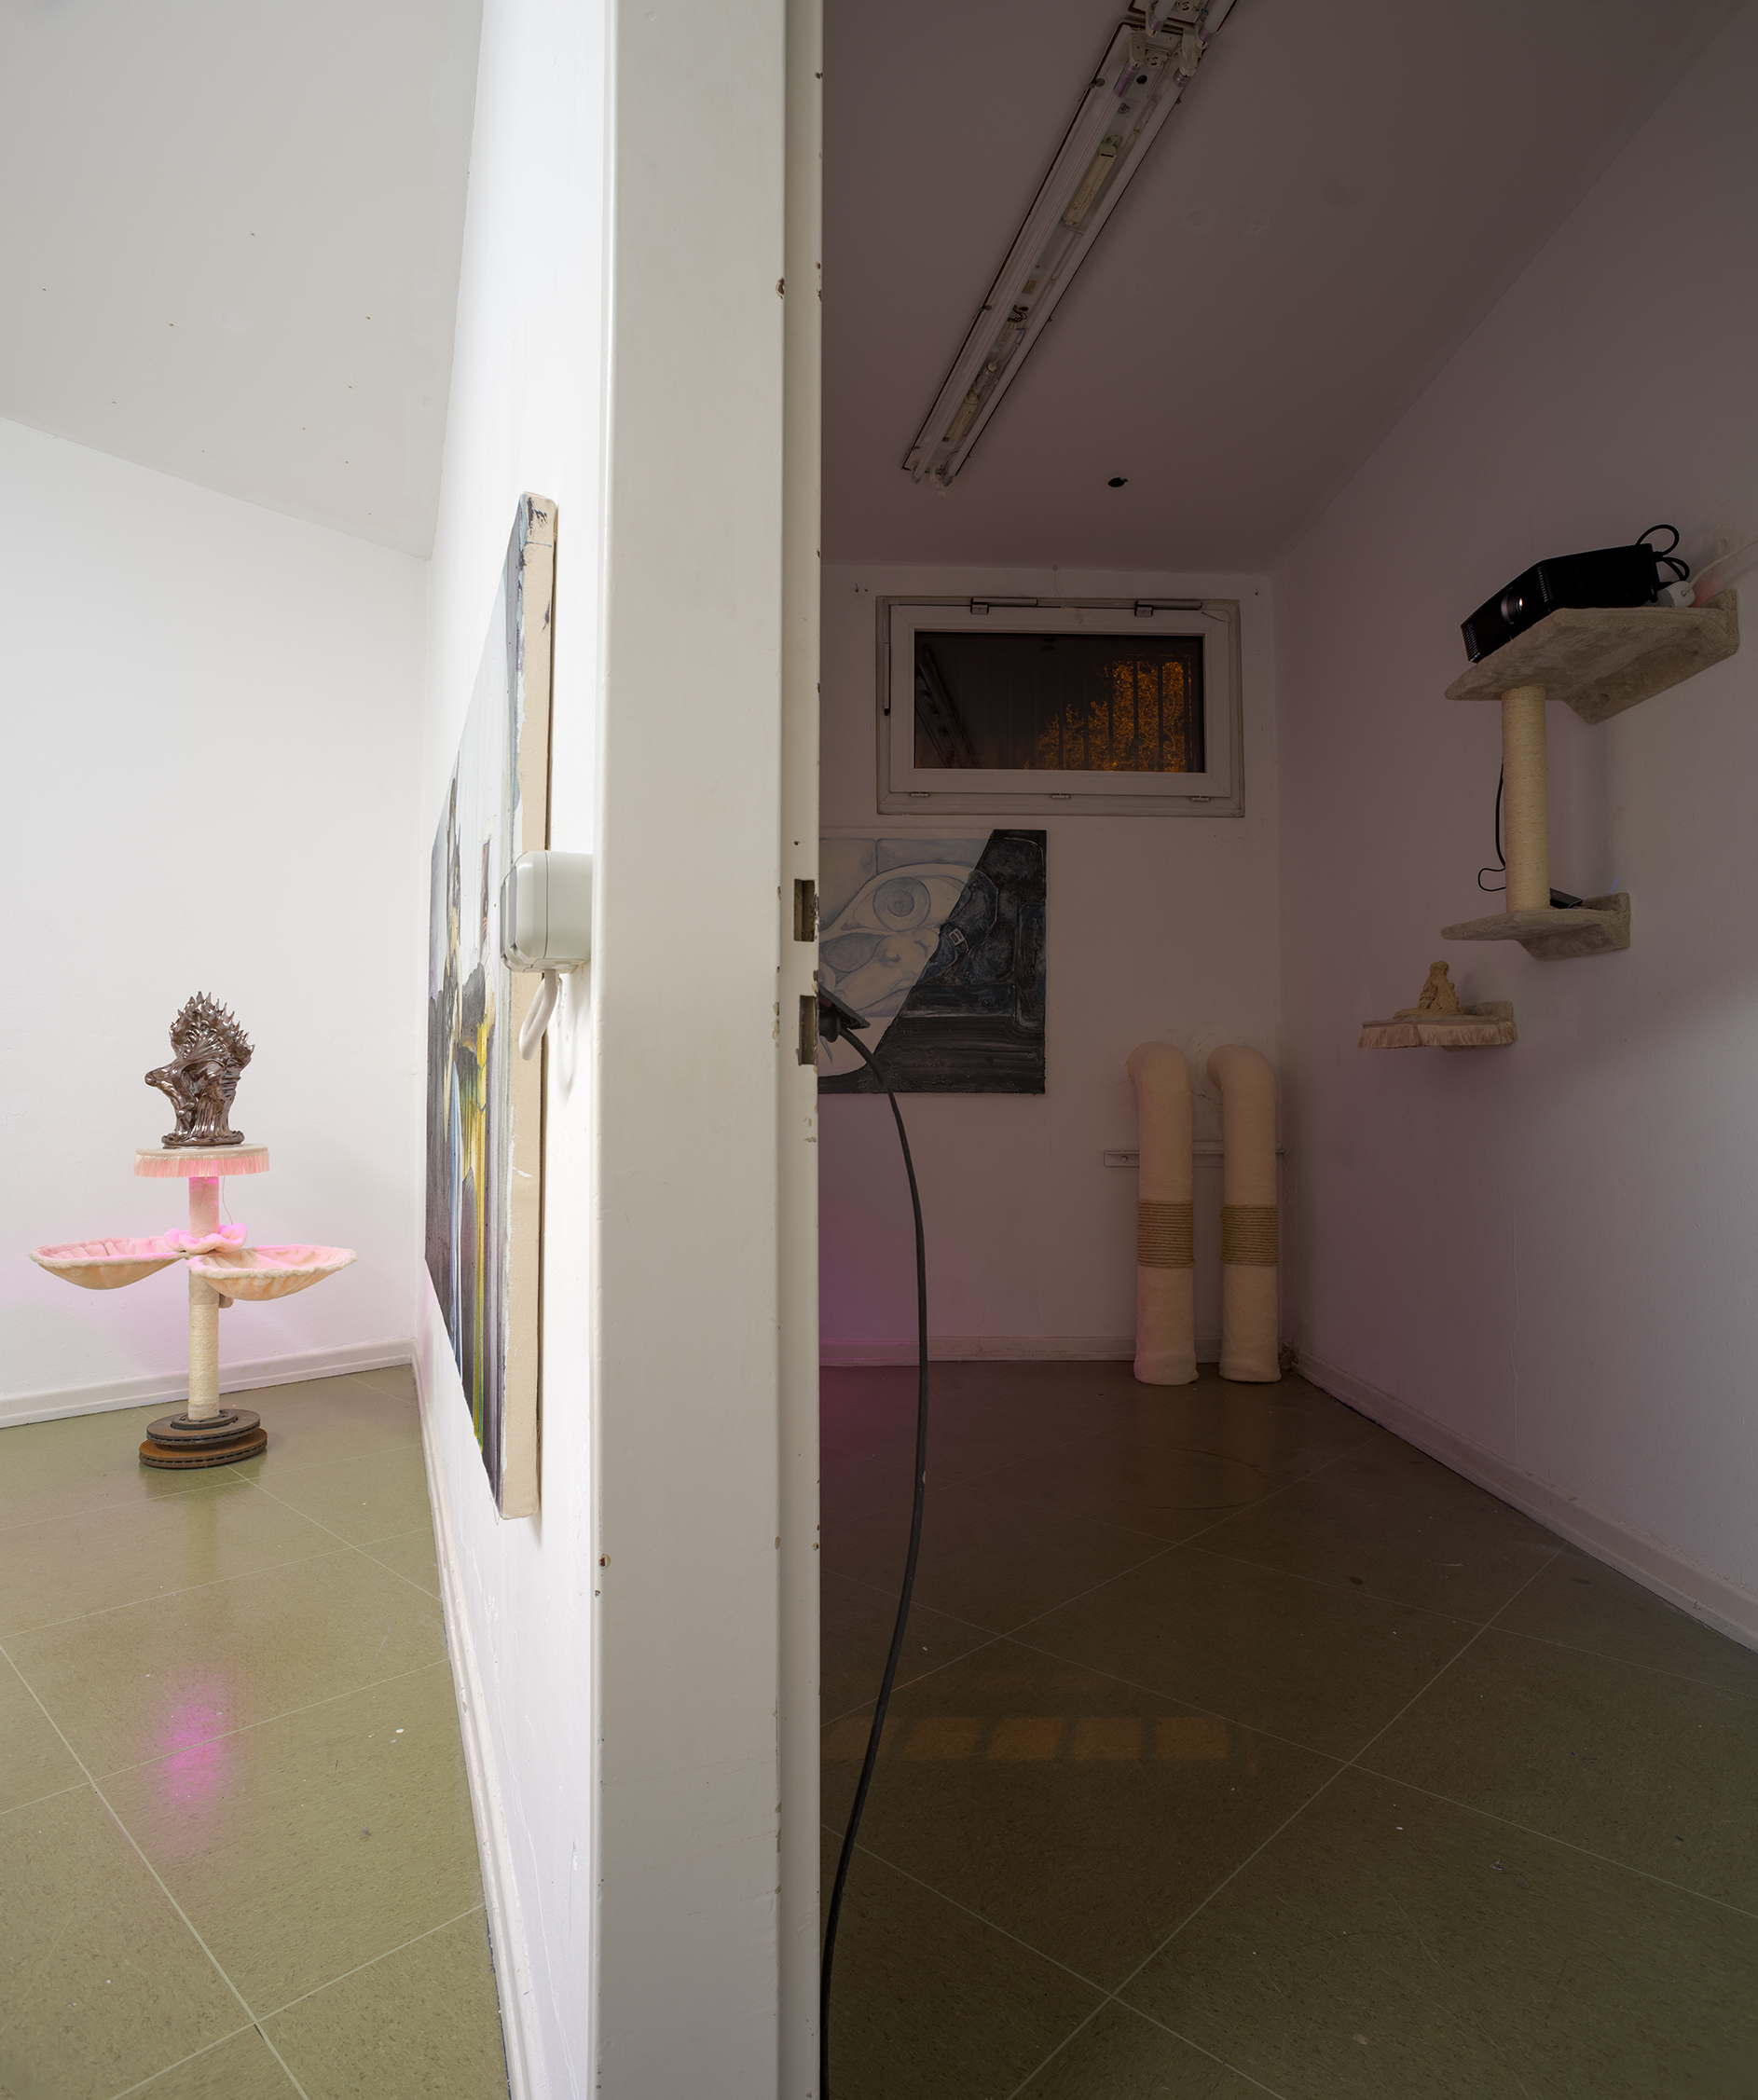 Installation view with works of Philip Hinge and Christian Theiß, MÉLANGE 2023